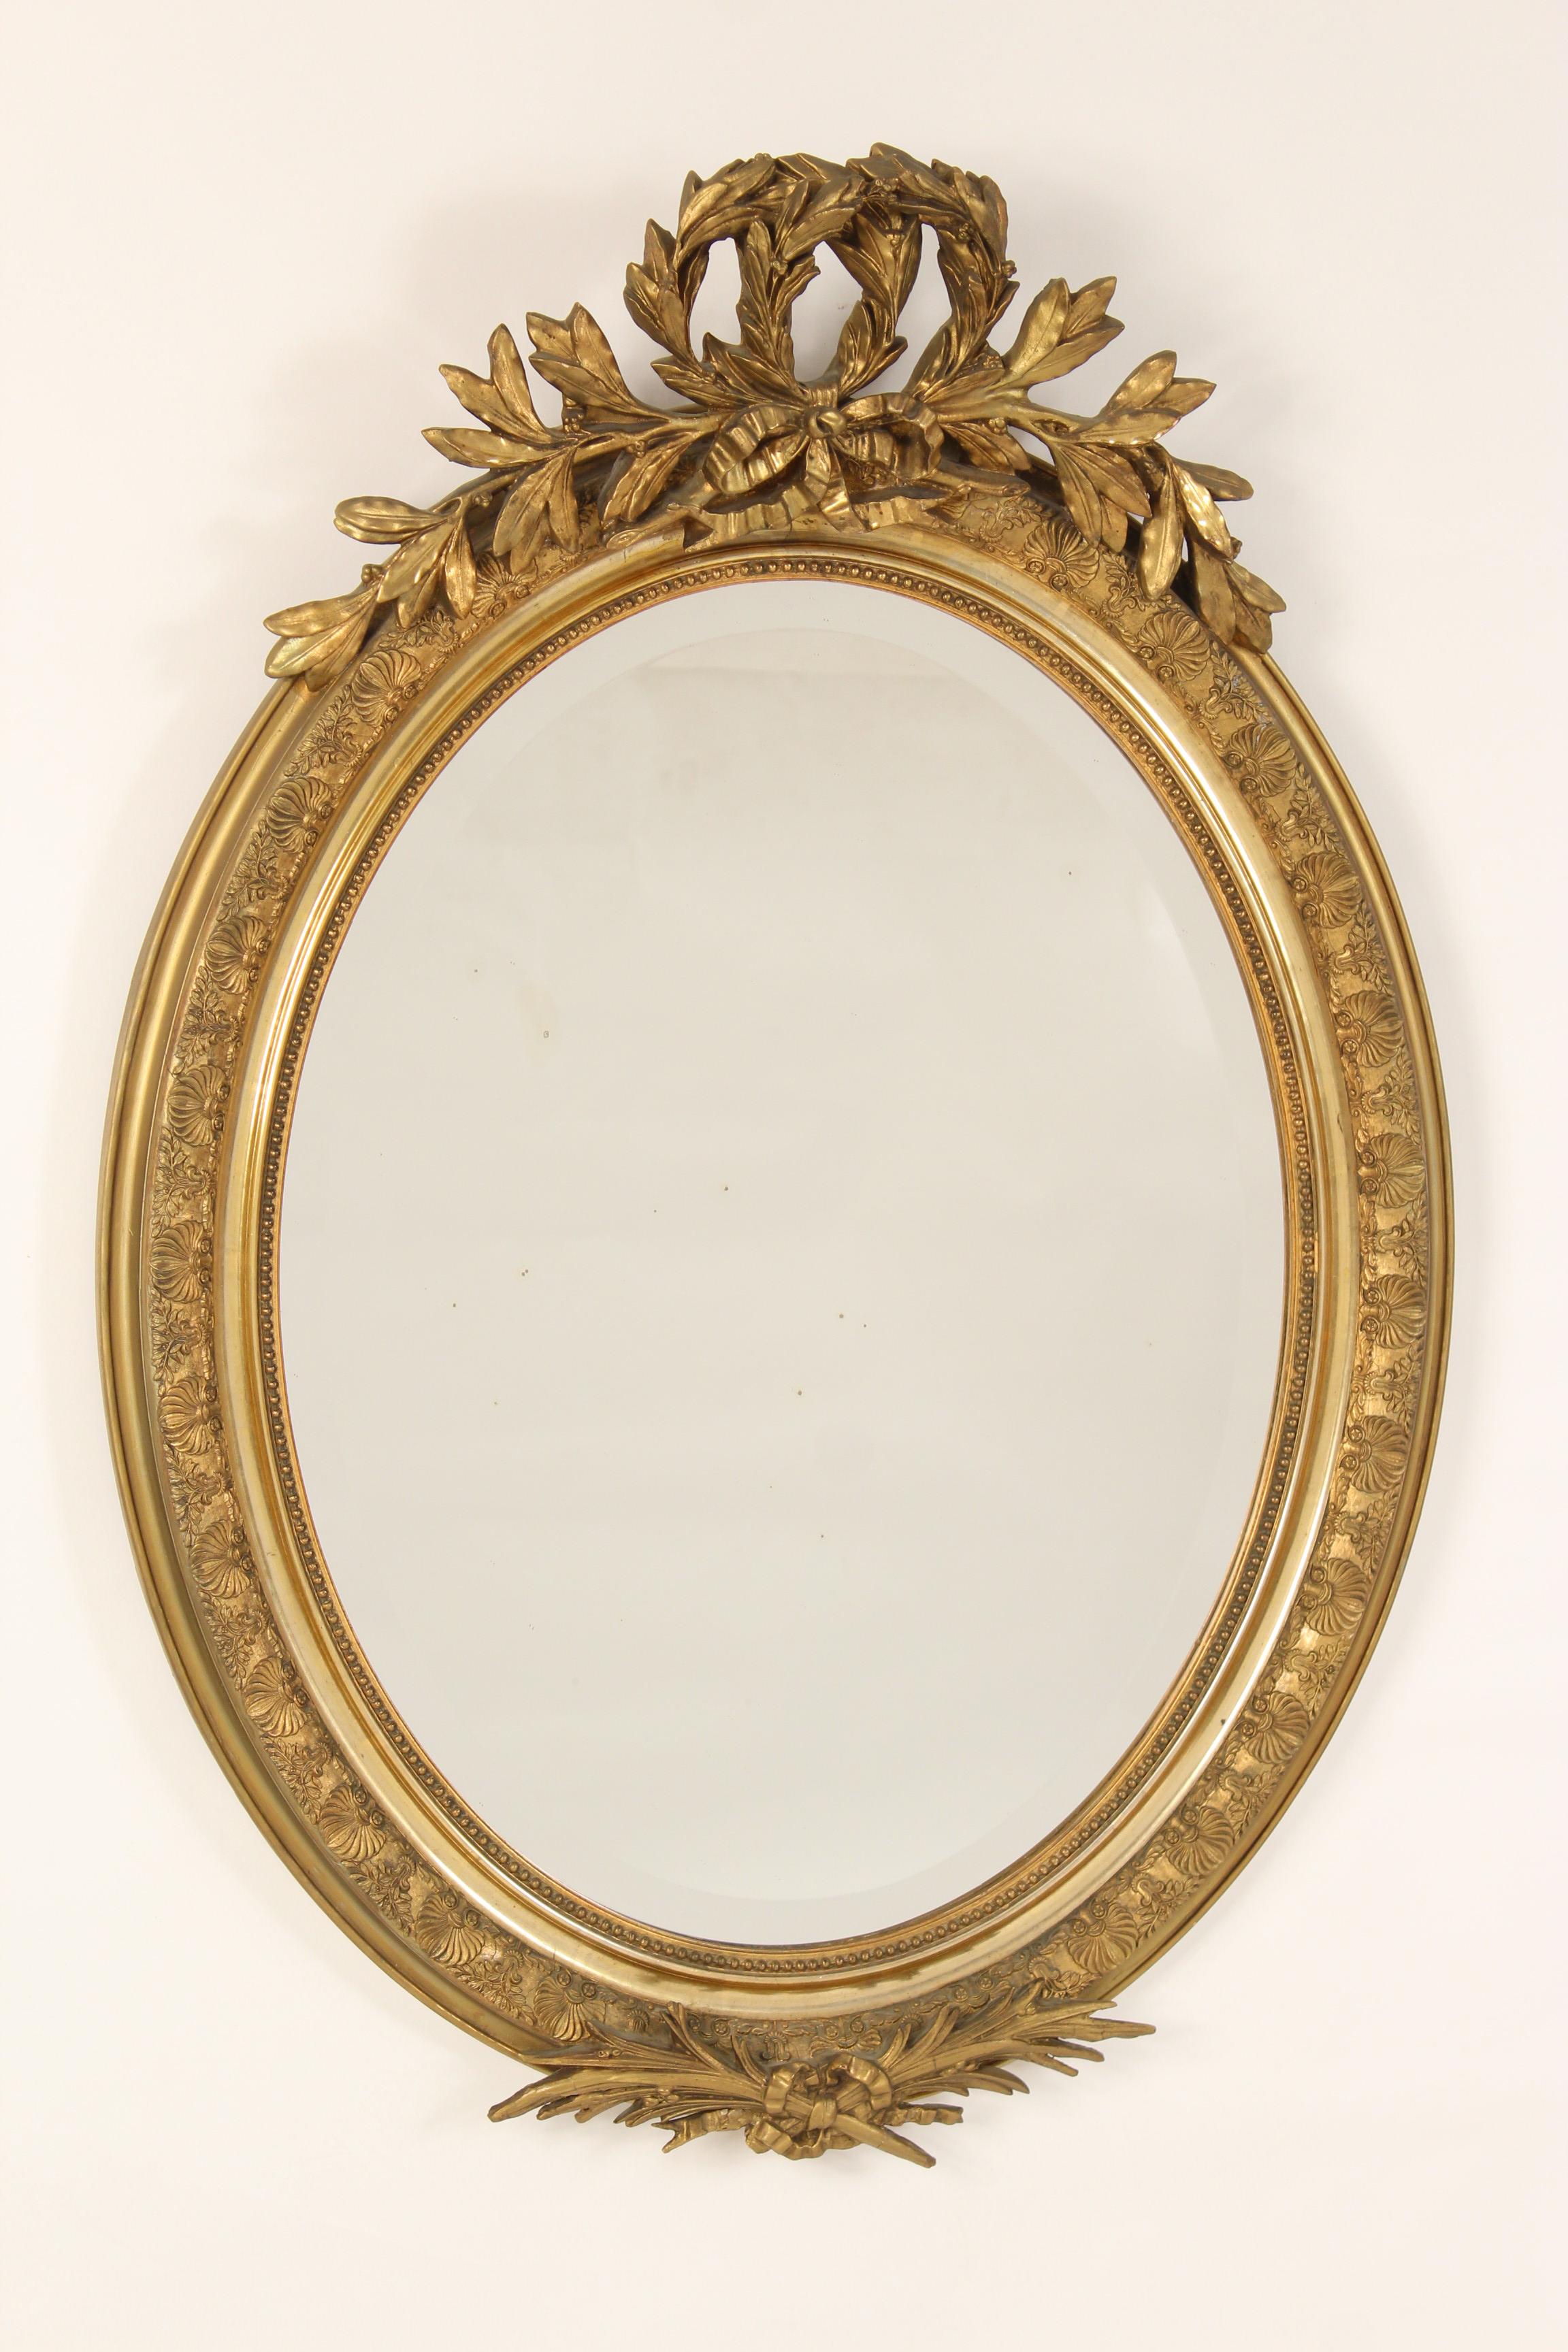 Antique Napoleon III style oval gilt wood and gesso beveled glass mirror, circa 1890-1910.